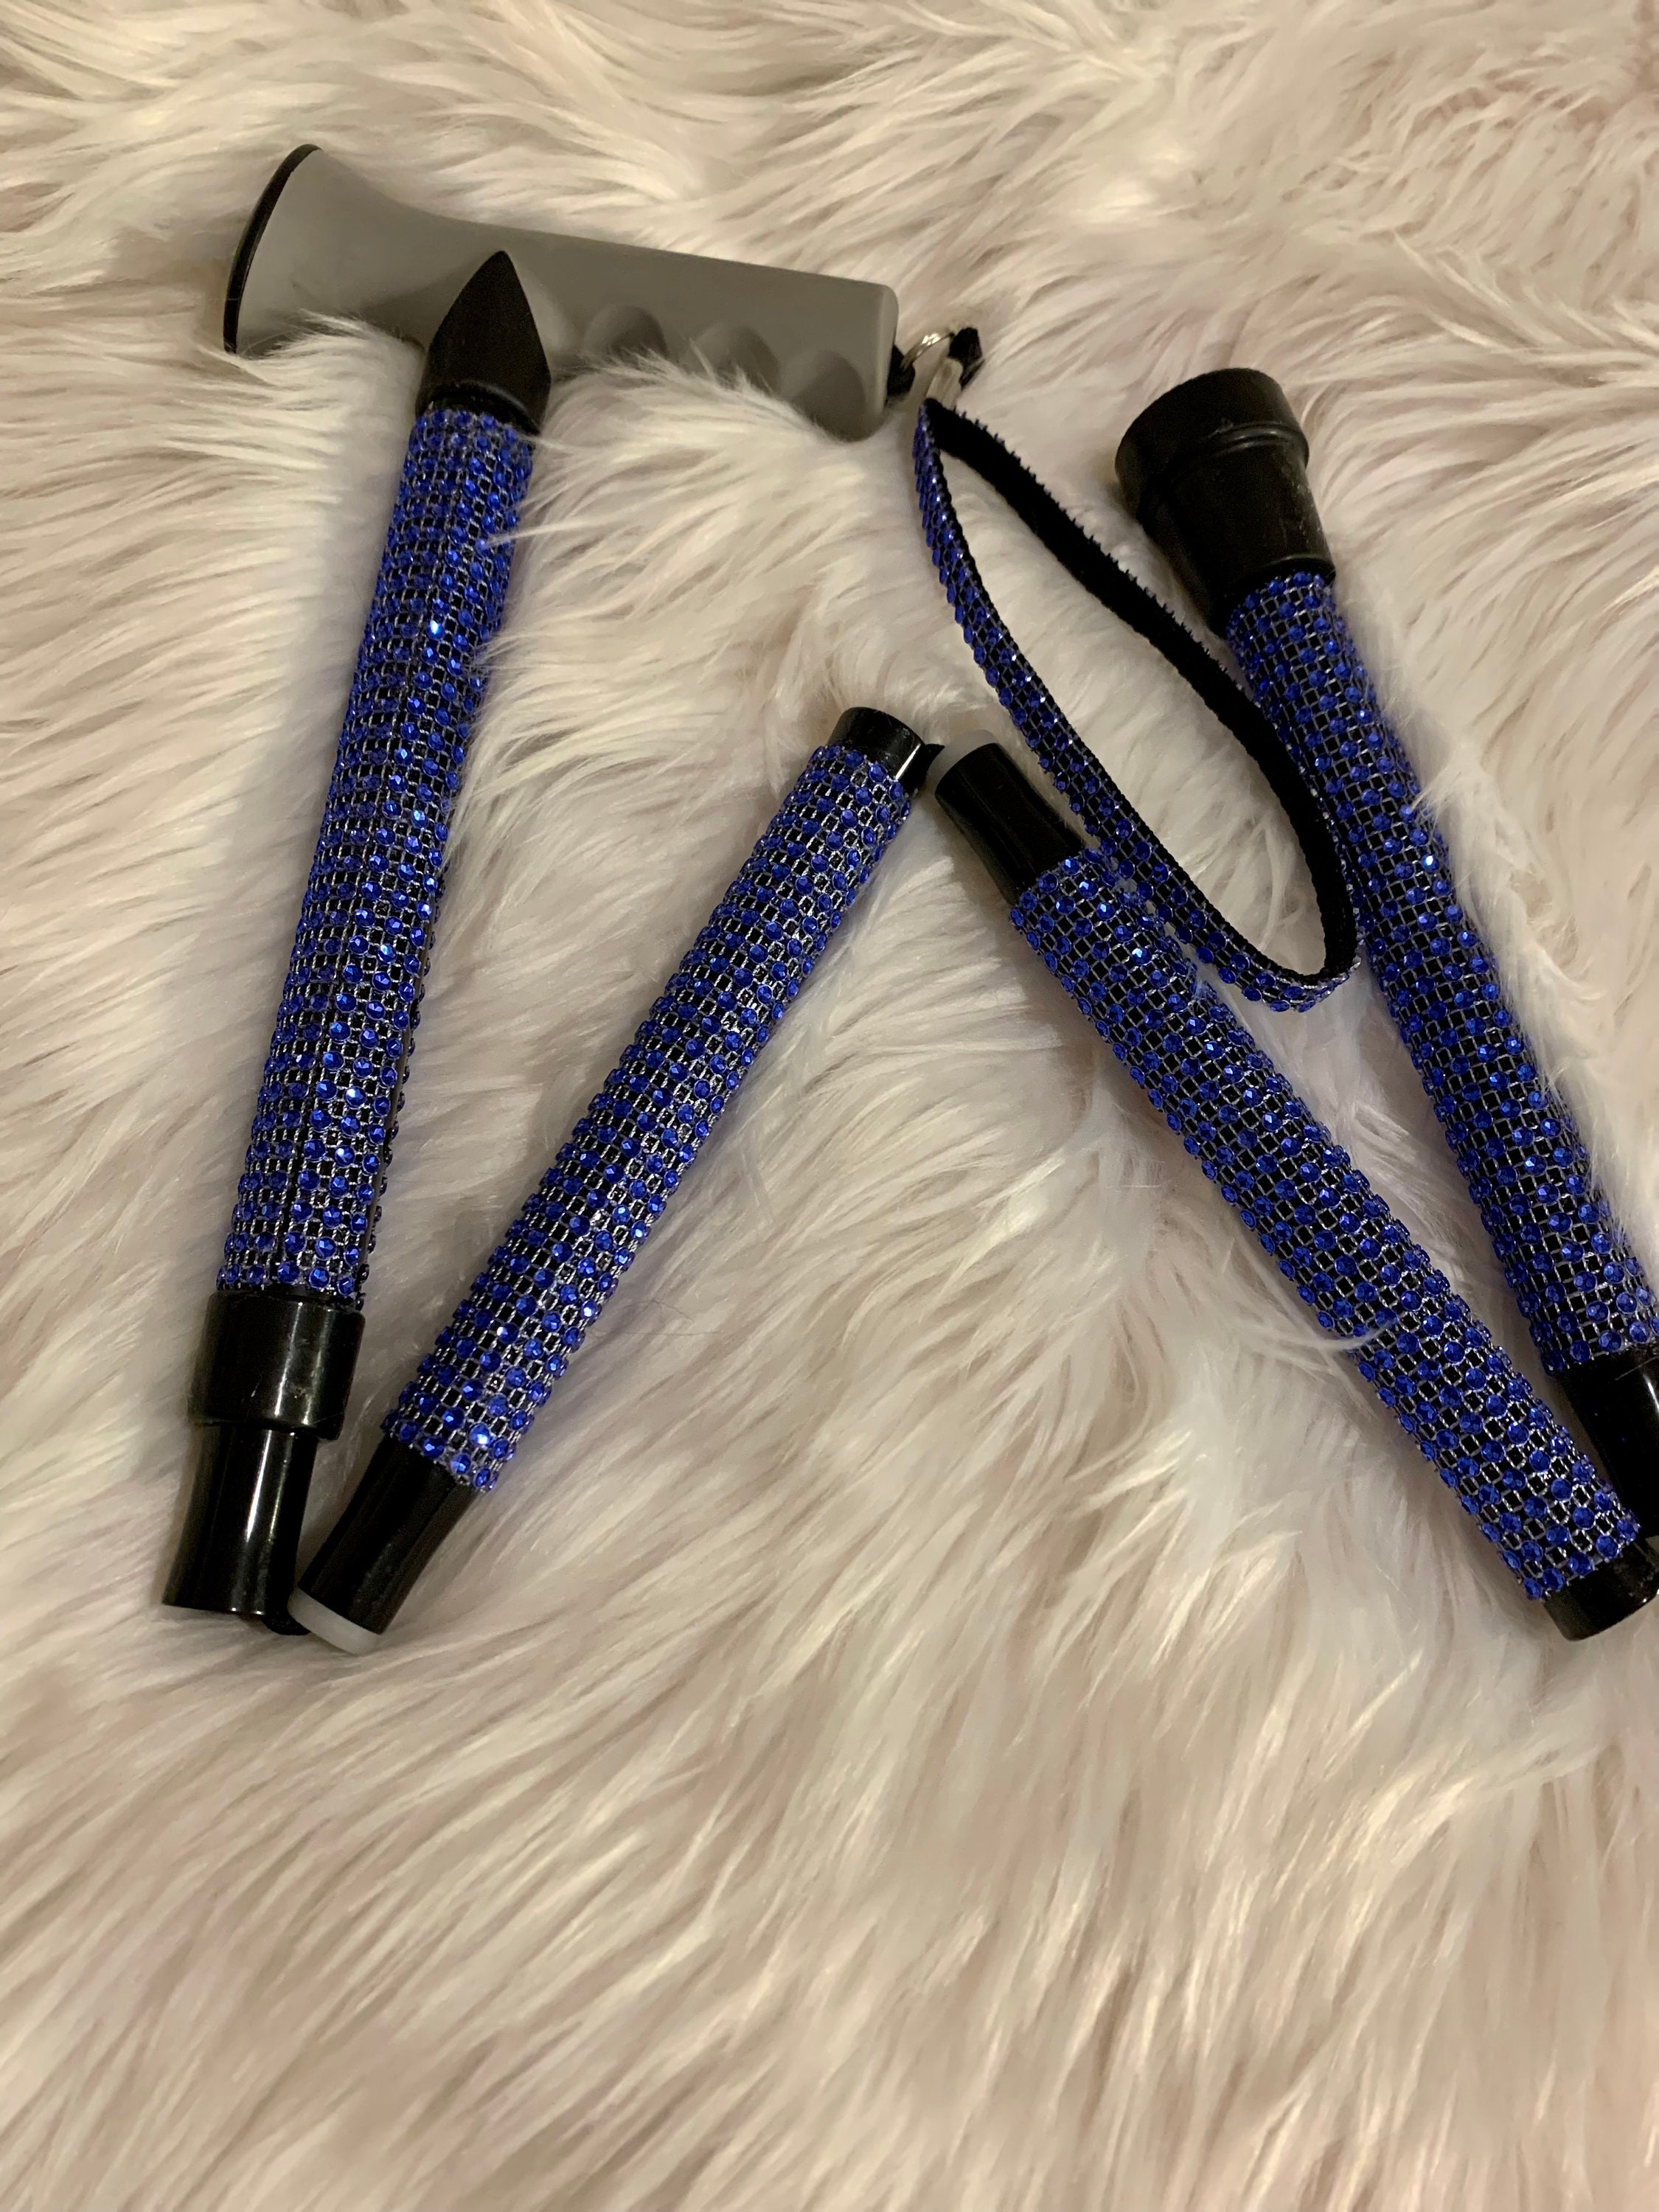 Royal Blue Rhinestone folding Cane Ideal for Multiple Sclerosis, Balance  Issues. Post Surgery. Wonderful Gift for a Loved One. Elegant 